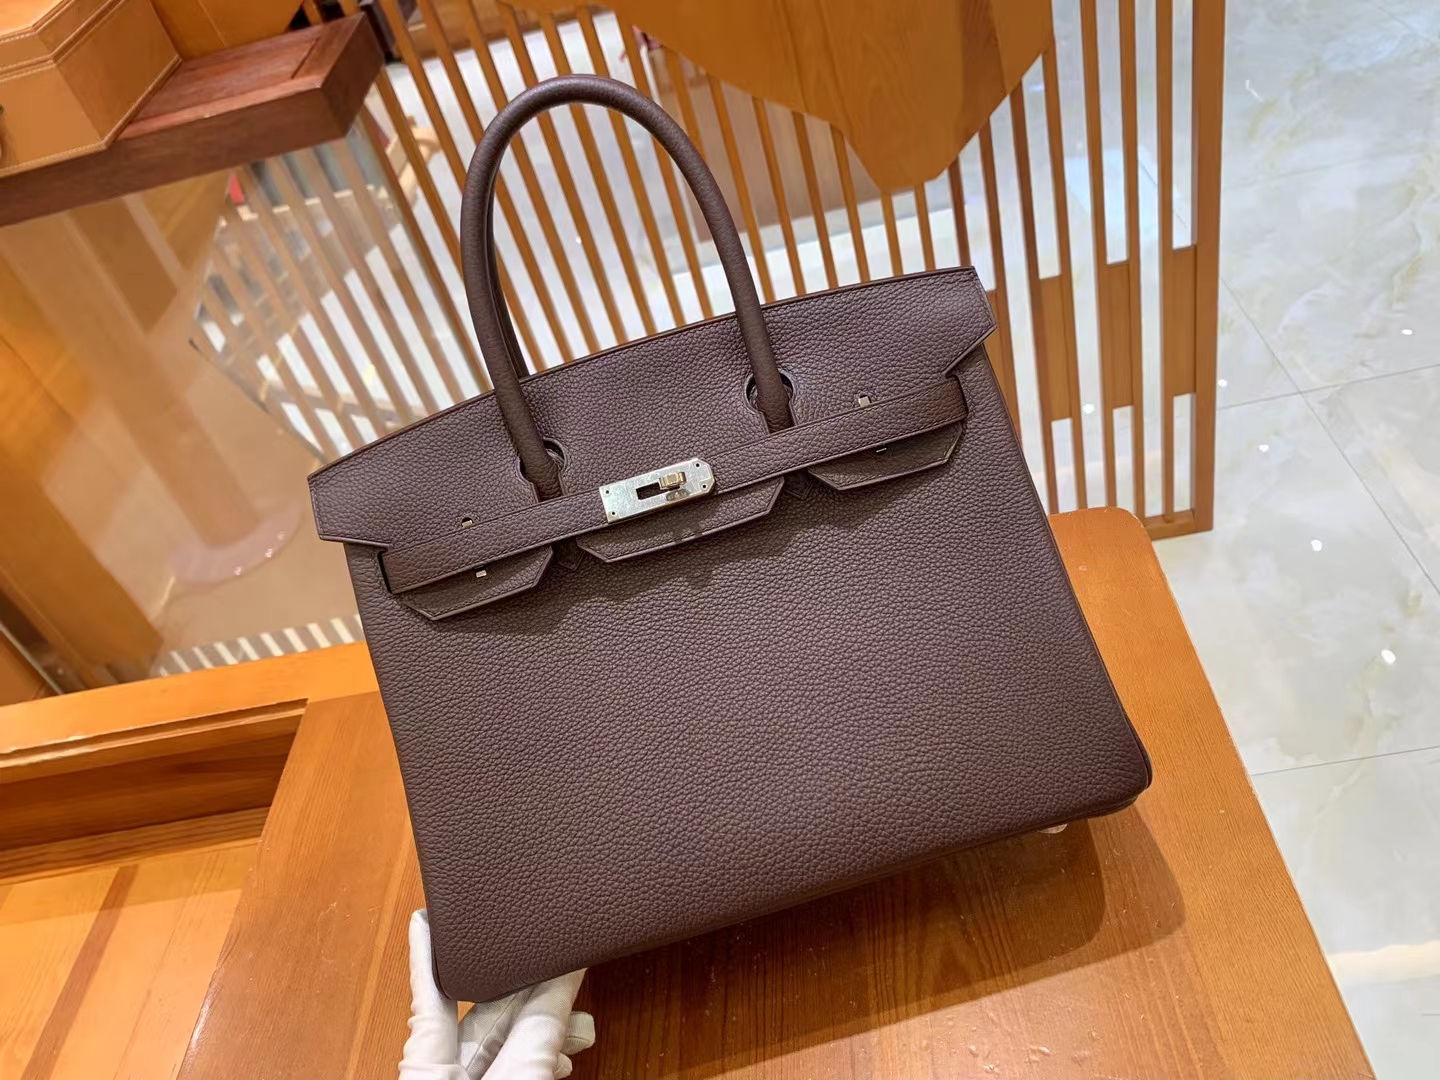 Hermes Birkin 25 in Chocolate Togo Leather and GHW